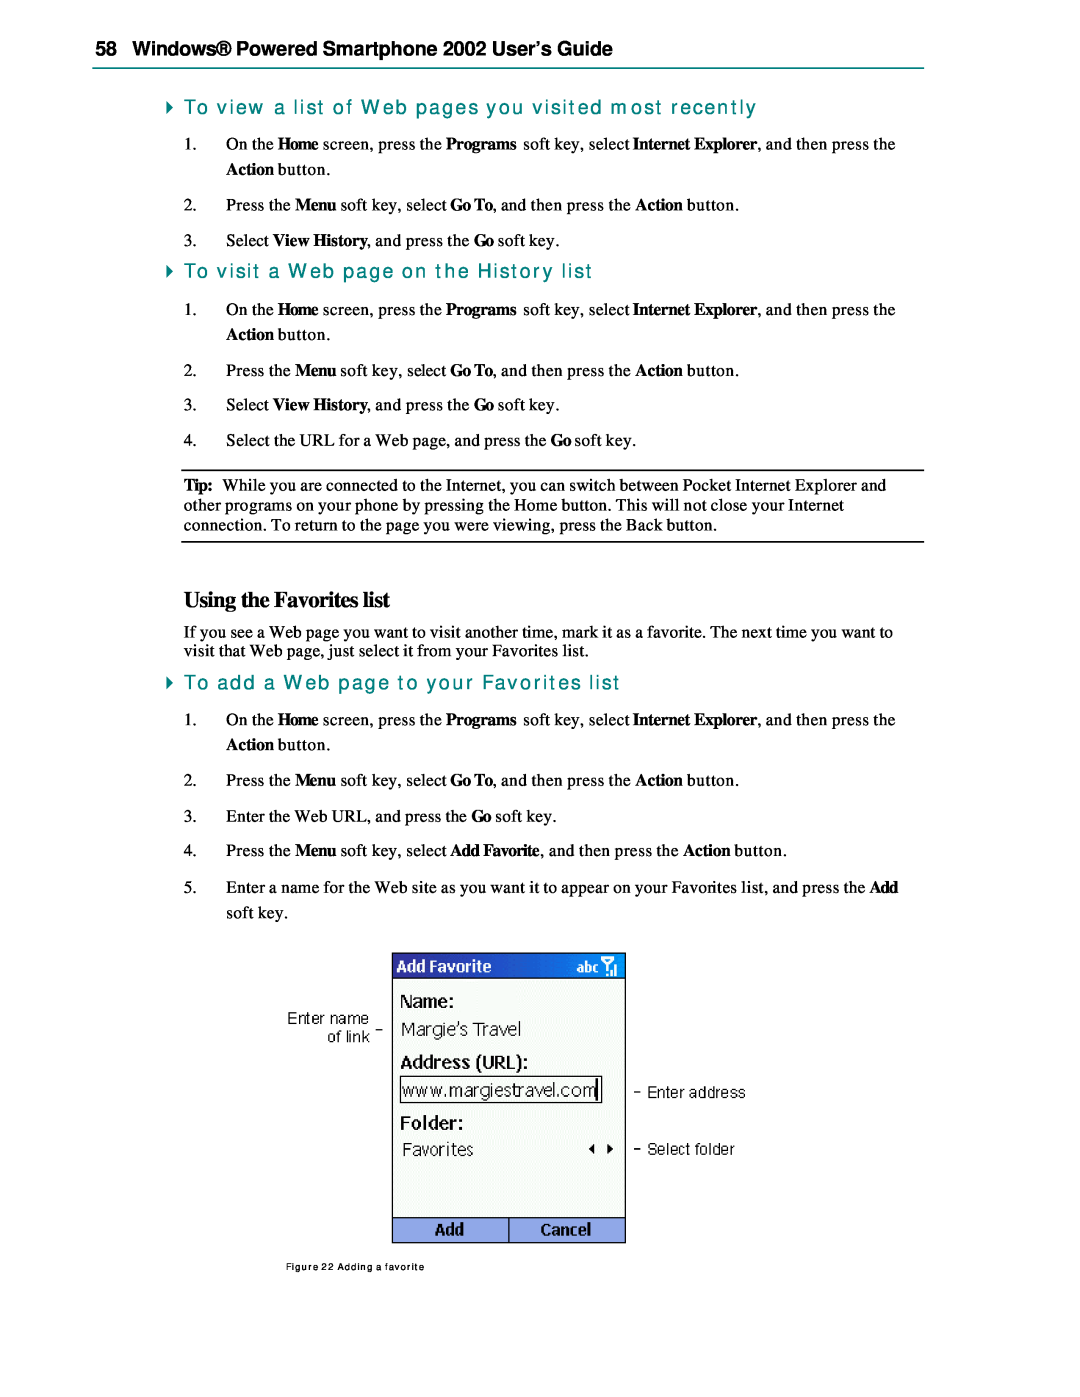 Microsoft manual Using the Favorites list, Windows Powered Smartphone 2002 User’s Guide 